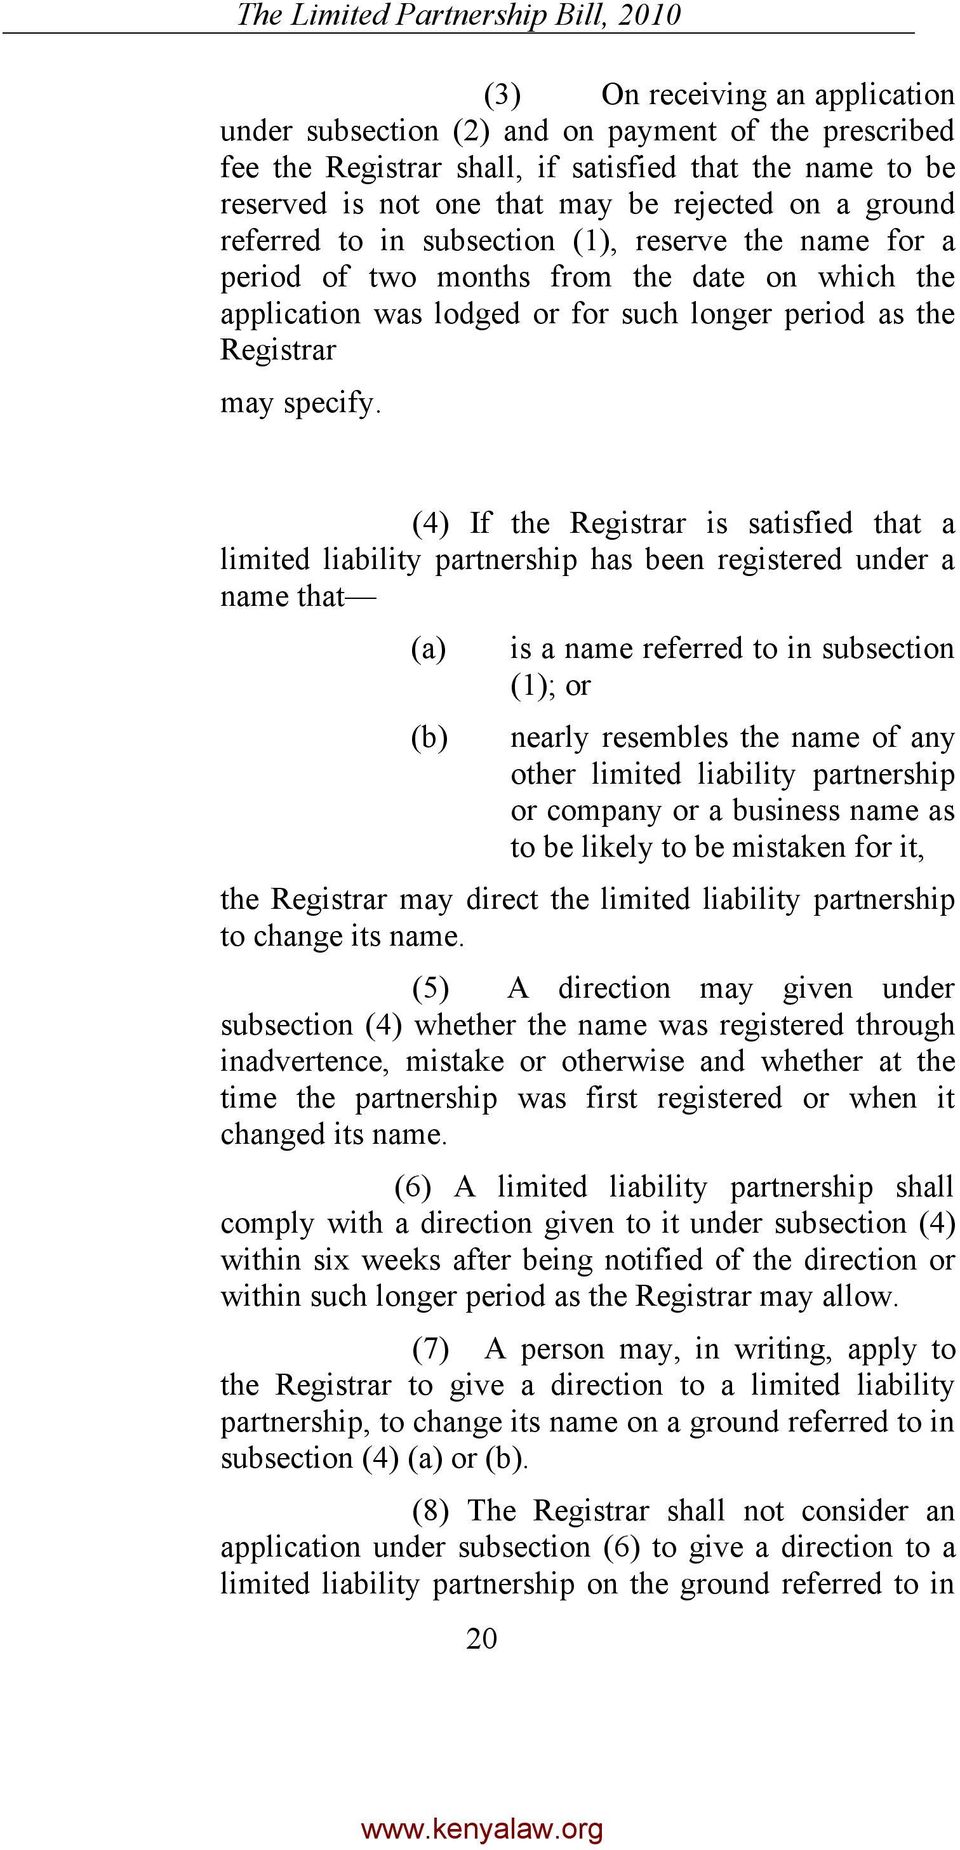 (4) If the Registrar is satisfied that a limited liability partnership has been registered under a name that 20 is a name referred to in subsection (1); or nearly resembles the name of any other